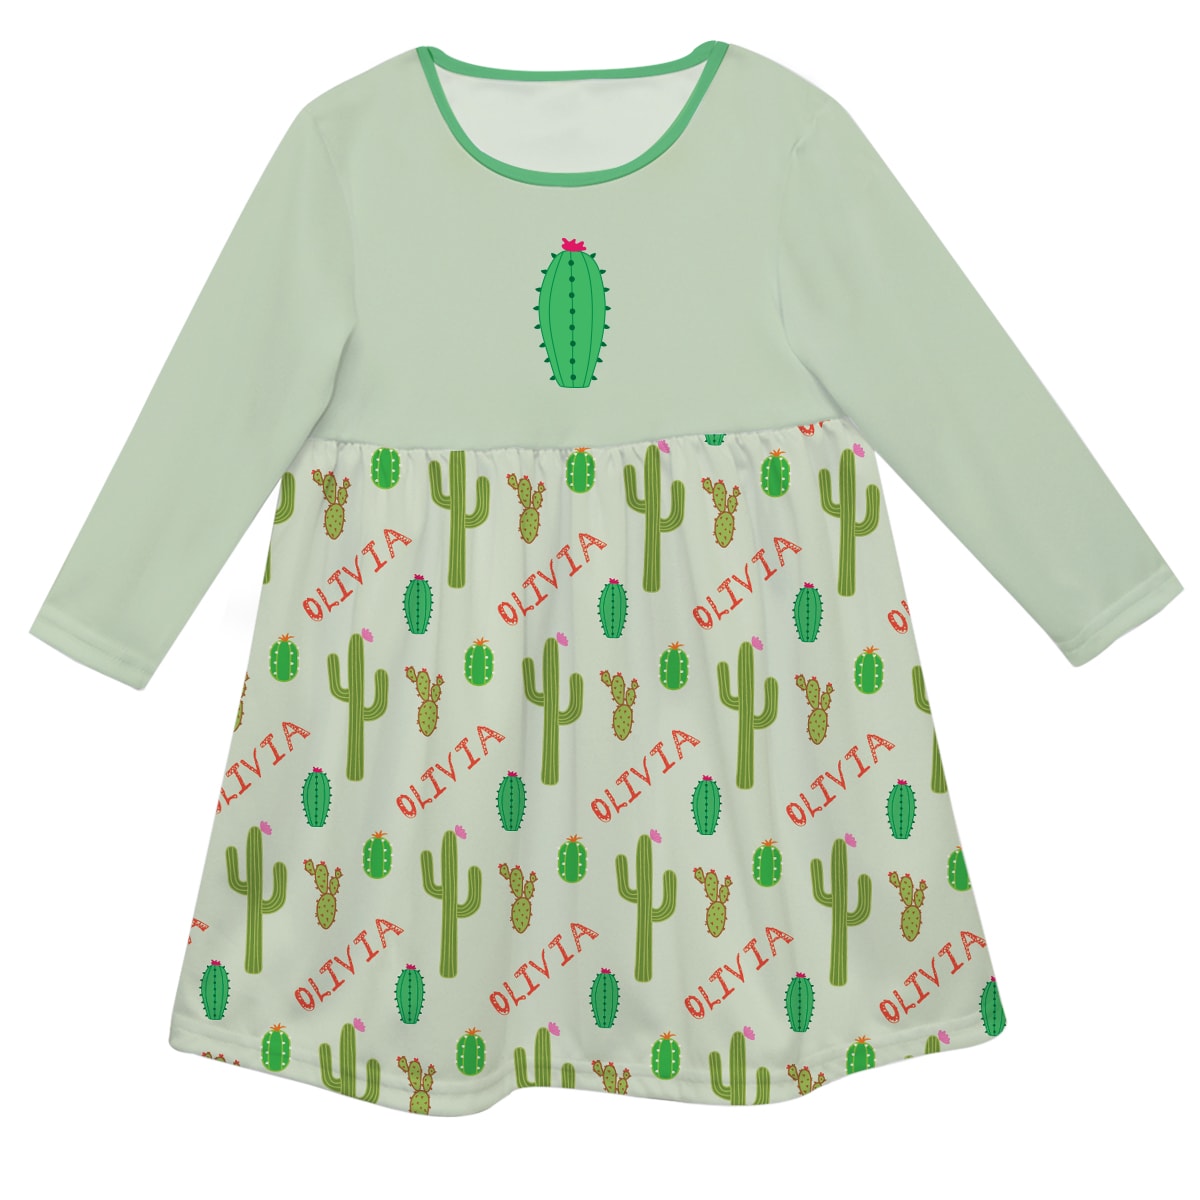 Girls green cactus dress with name - Wimziy&Co.